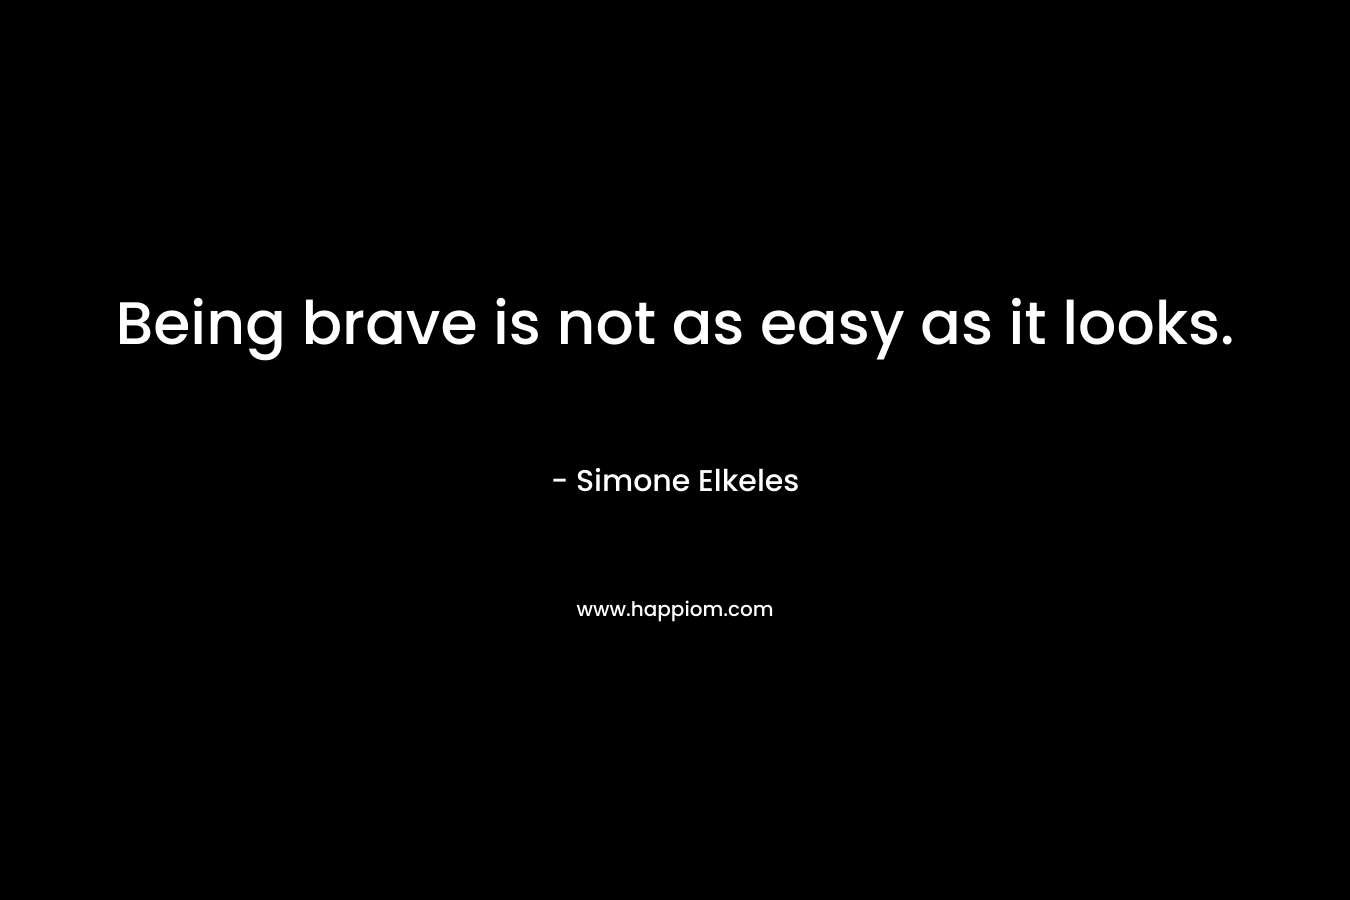 Being brave is not as easy as it looks.